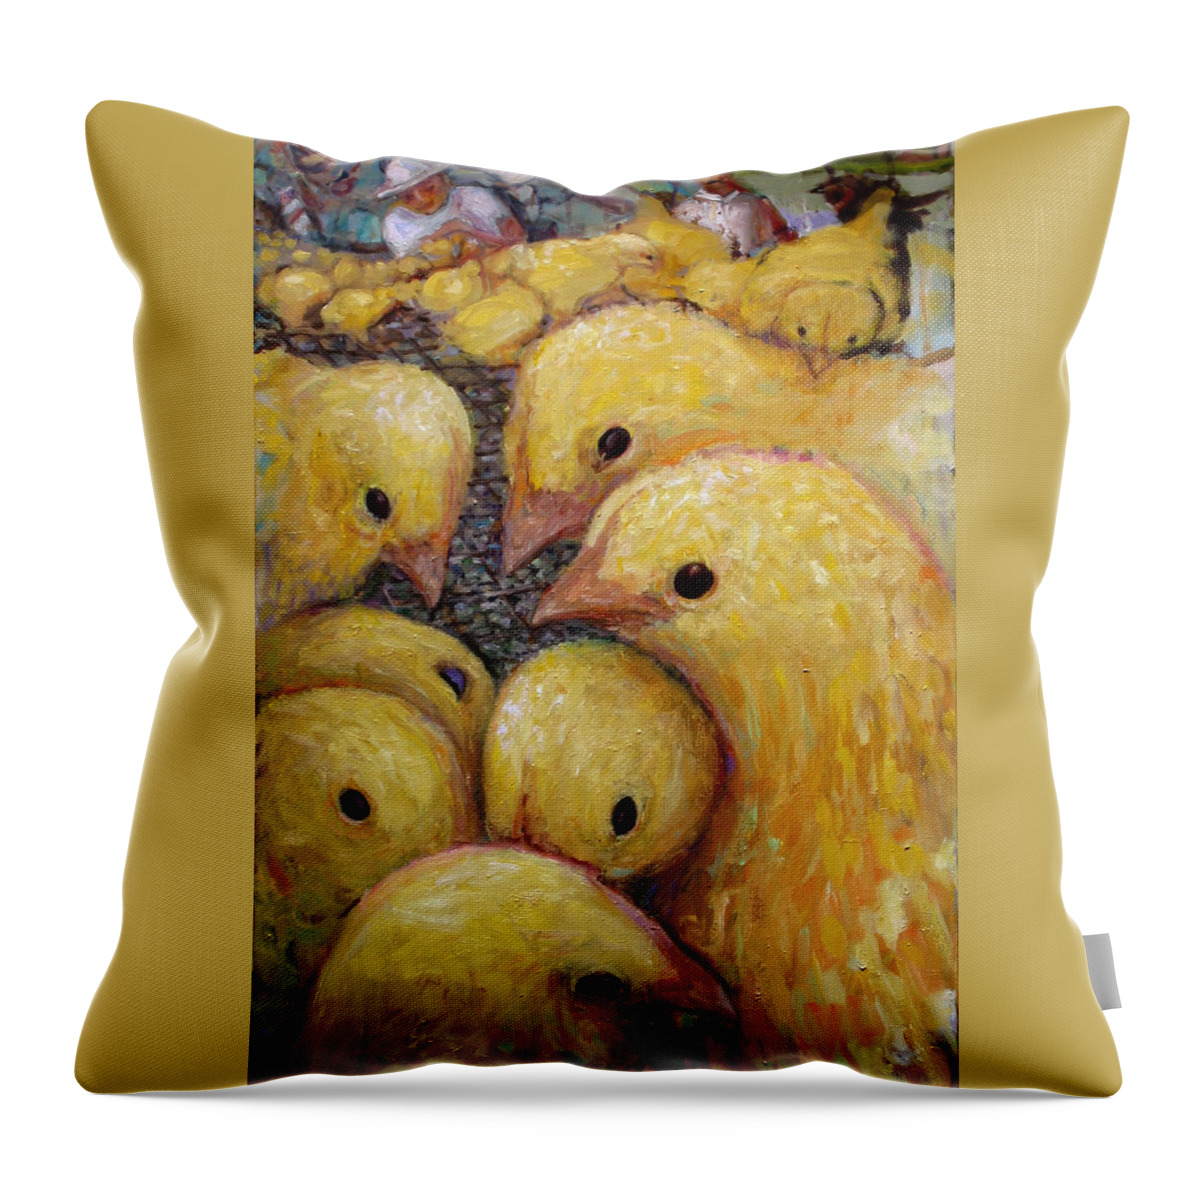 Primary Colors Throw Pillow featuring the painting Frier's by Paul Emory